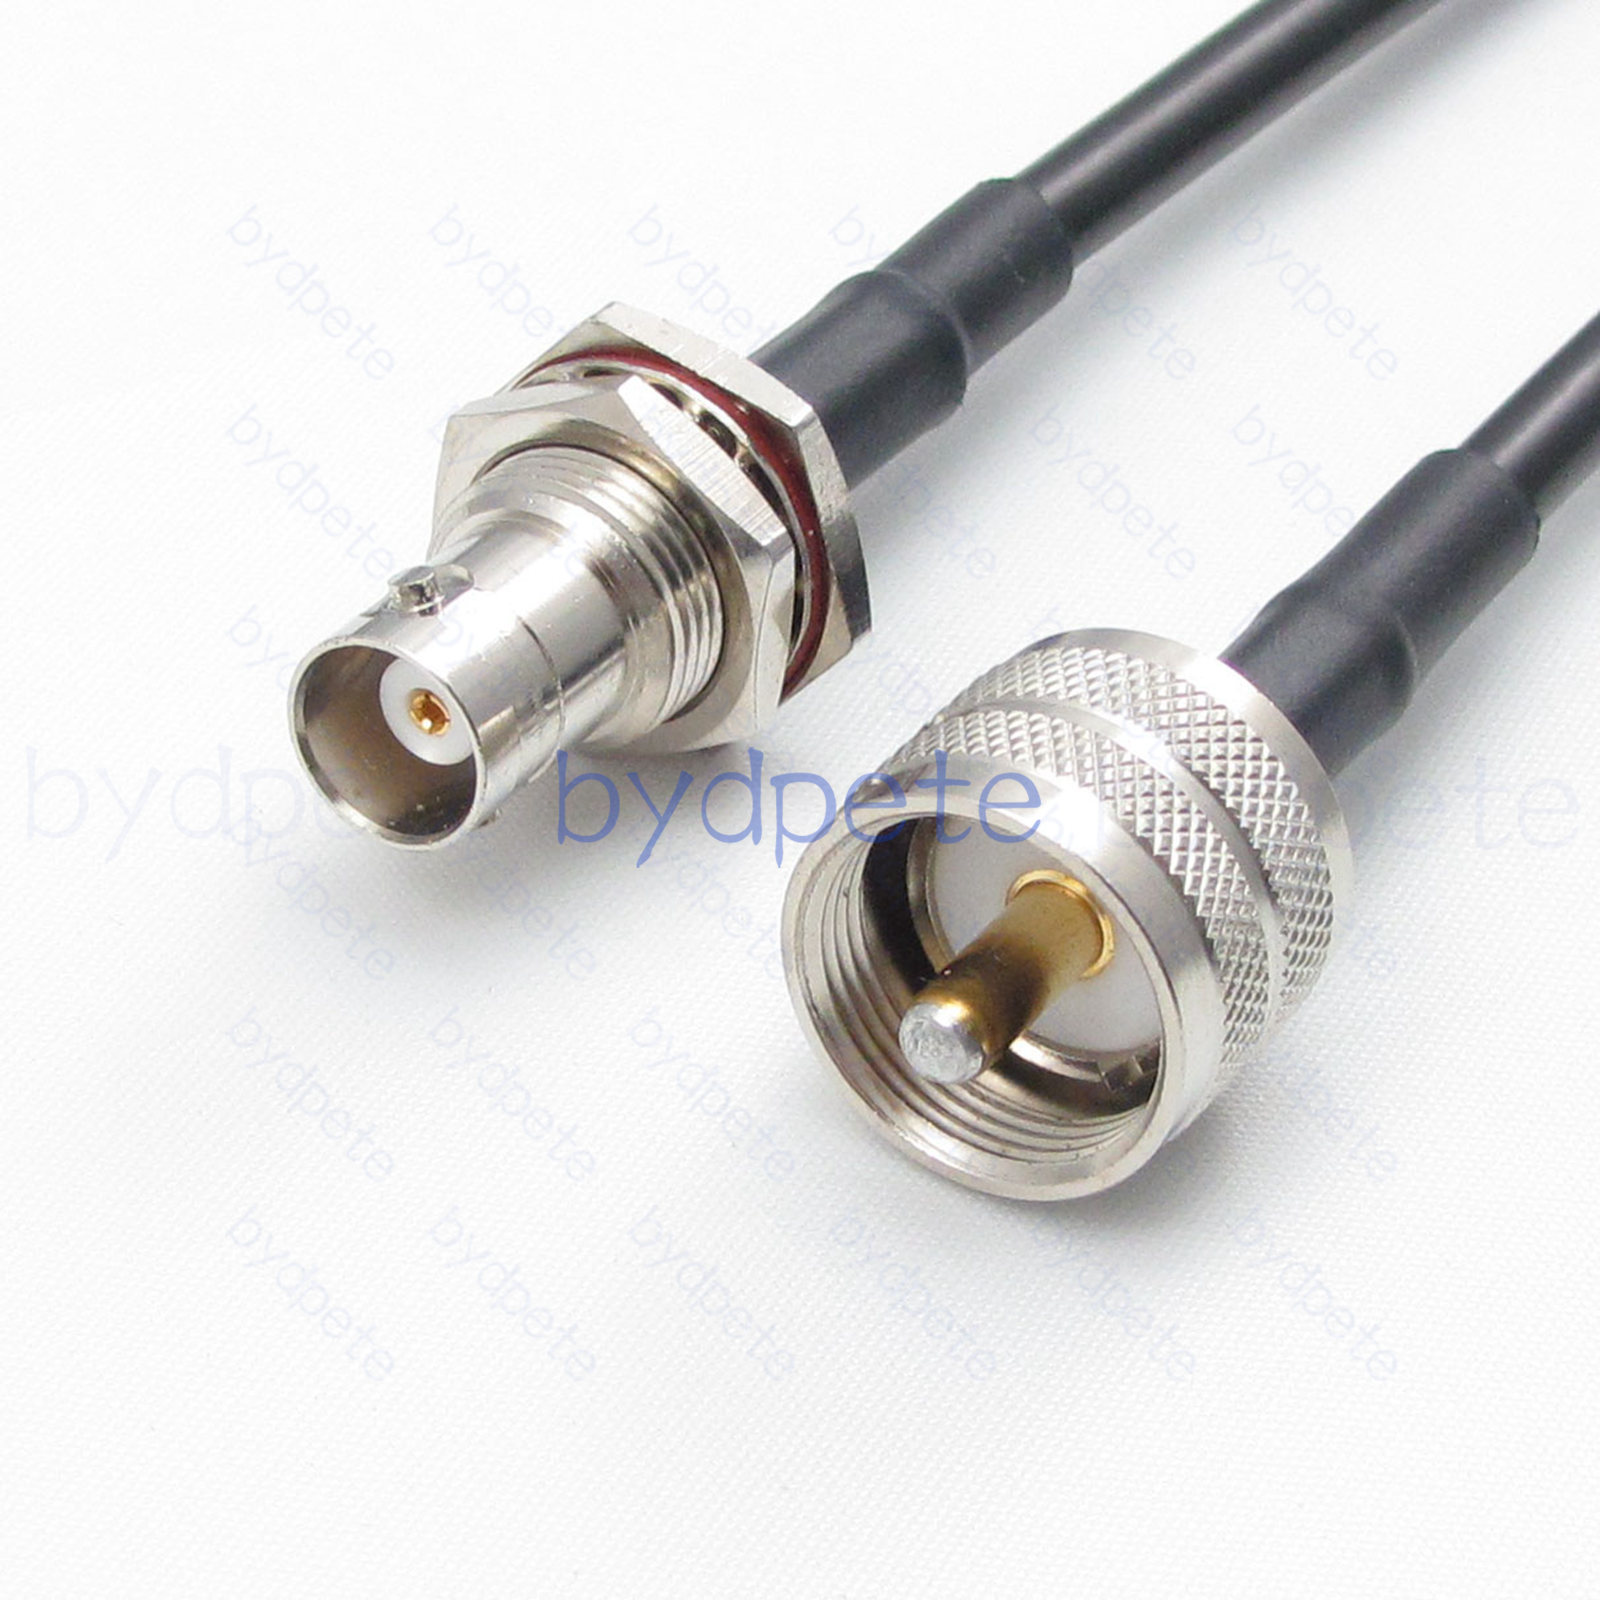 BNC Female Bulkhead Waterproof to UHF Male PL259 PL-259 RG58 Coaxial Cable 50ohms Coax Koaxial Kable bydpete BYDC074BNC58L1